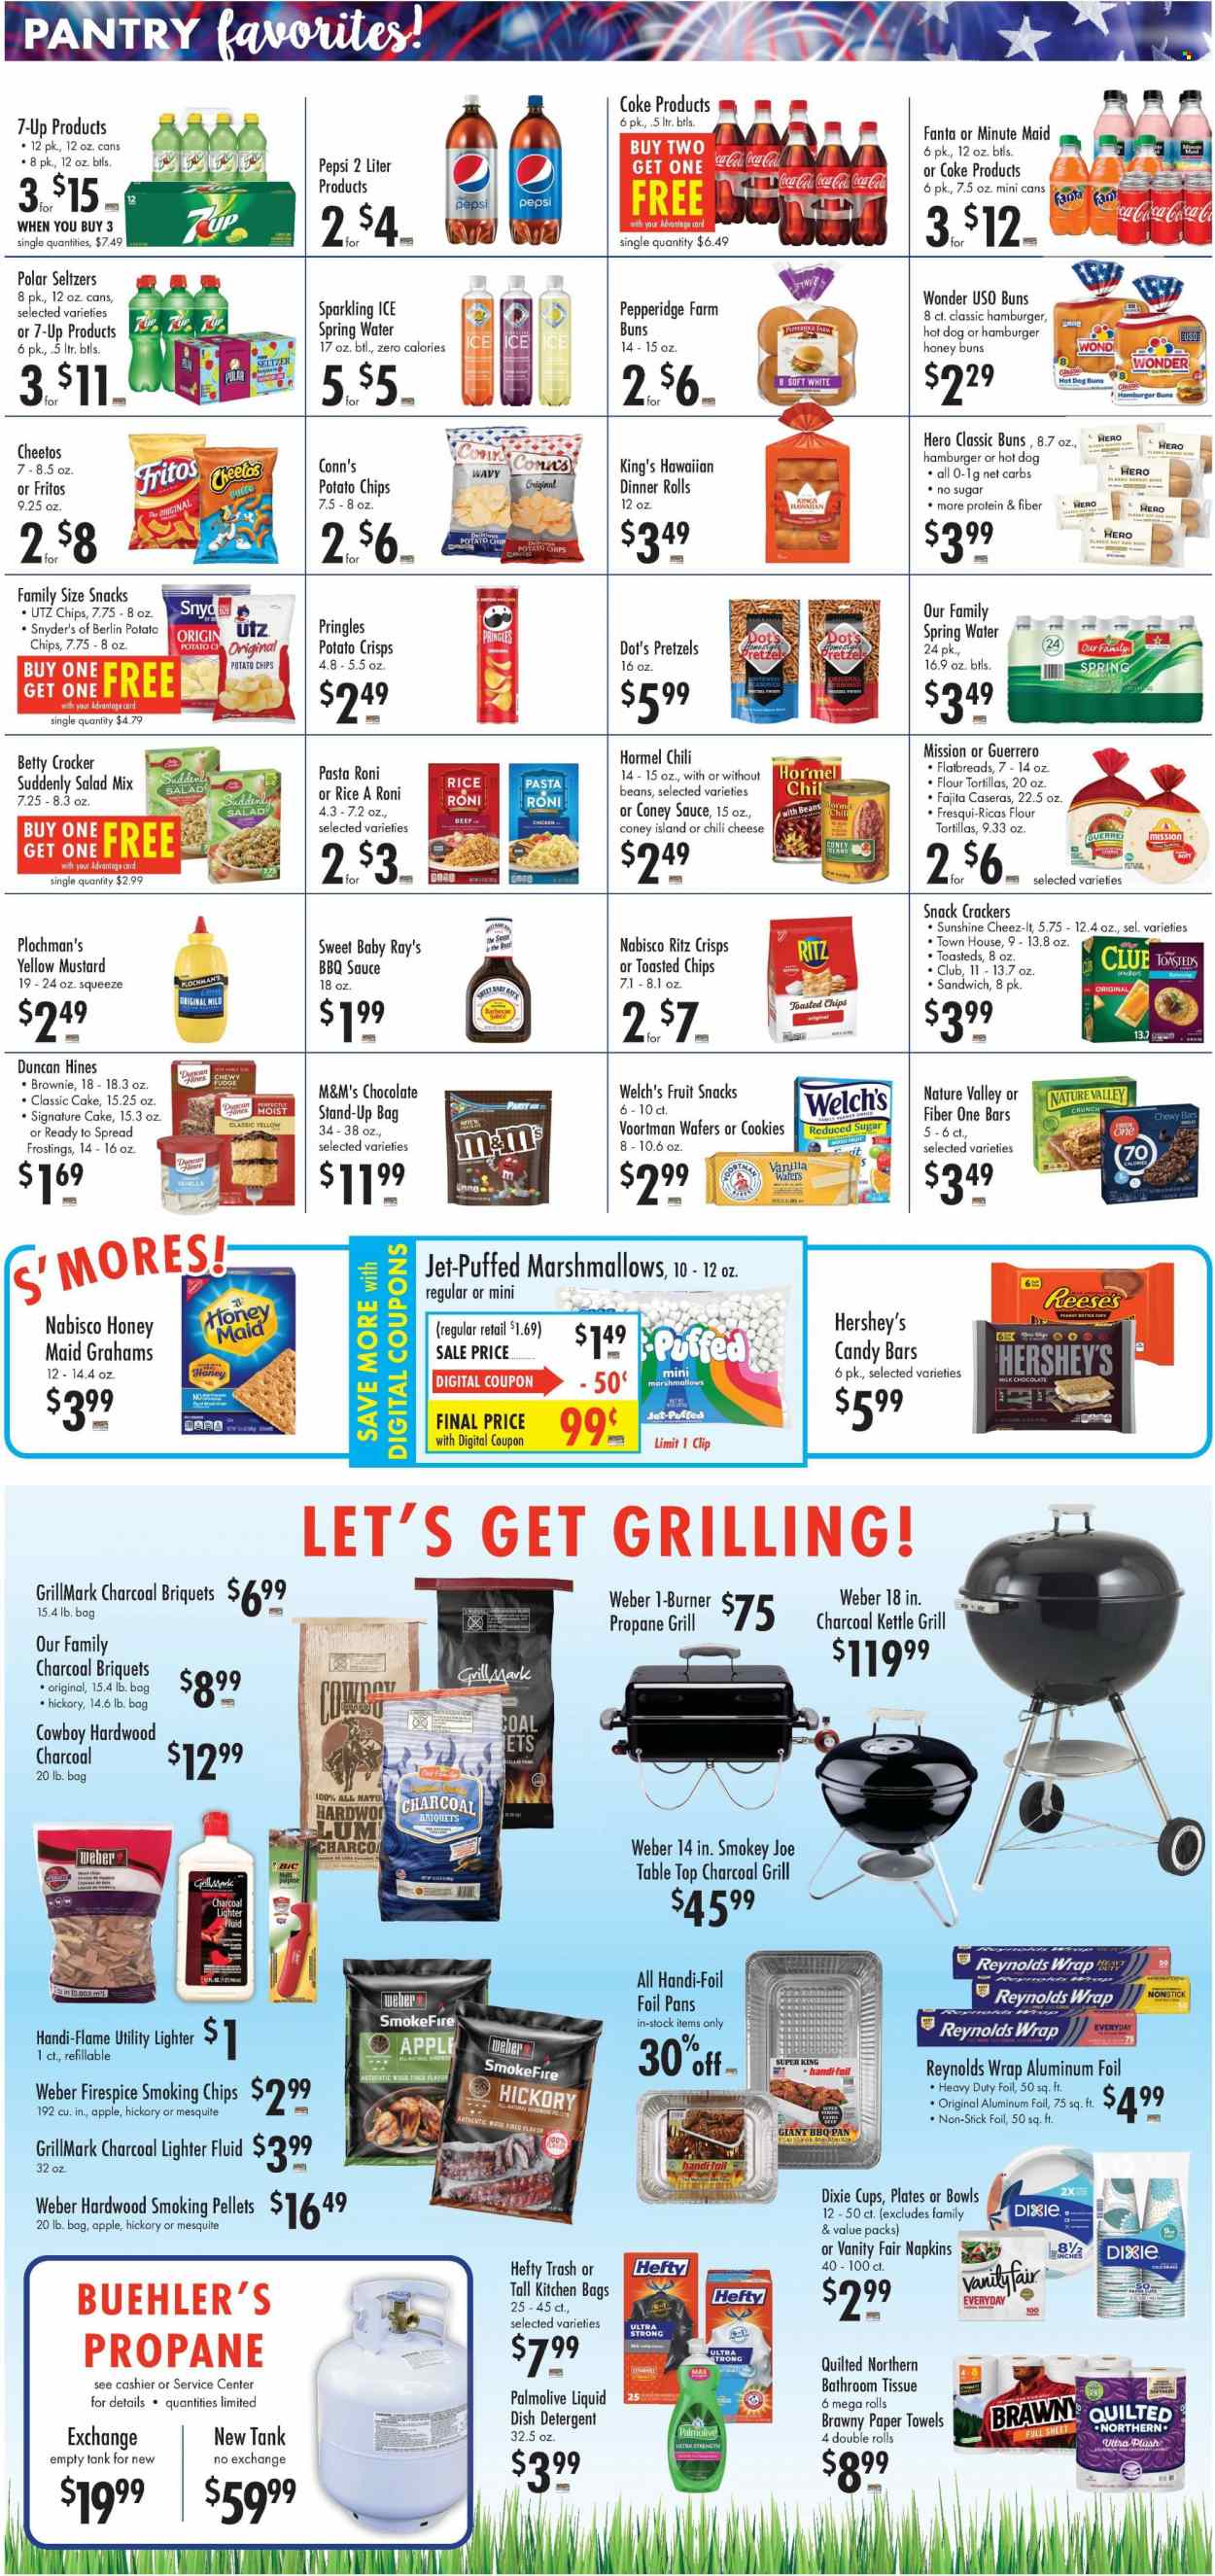 thumbnail - Buehler's Flyer - 05/24/2023 - 05/30/2023 - Sales products - tortillas, pretzels, cake, dinner rolls, buns, burger buns, flour tortillas, puffs, brownies, sweet rolls, onion, salad, Welch's, sandwich, pasta, sauce, fajita, Hormel, Sunshine, Reese's, Hershey's, cookies, fudge, marshmallows, milk chocolate, wafers, chocolate, M&M's, cereal bar, crackers, peanut butter cups, fruit snack, RITZ, candy bar, Nabisco, Fritos, potato crisps, potato chips, Pringles, Cheetos, chips, Cheez-It, Honey Maid, Nature Valley, Fiber One, rice, BBQ sauce, mustard, Coca-Cola, Pepsi, Fanta, Diet Pepsi, soft drink, 7UP, fruit punch, Coke, seltzer water, spring water, flavored water, water, chicken, napkins, bath tissue, Quilted Northern, kitchen towels, paper towels, detergent, dishwasher cleaner, Jet, Palmolive, BIC, Hefty, plate, pan, aluminium foil, tank, grill, Weber, briquettes. Page 5.